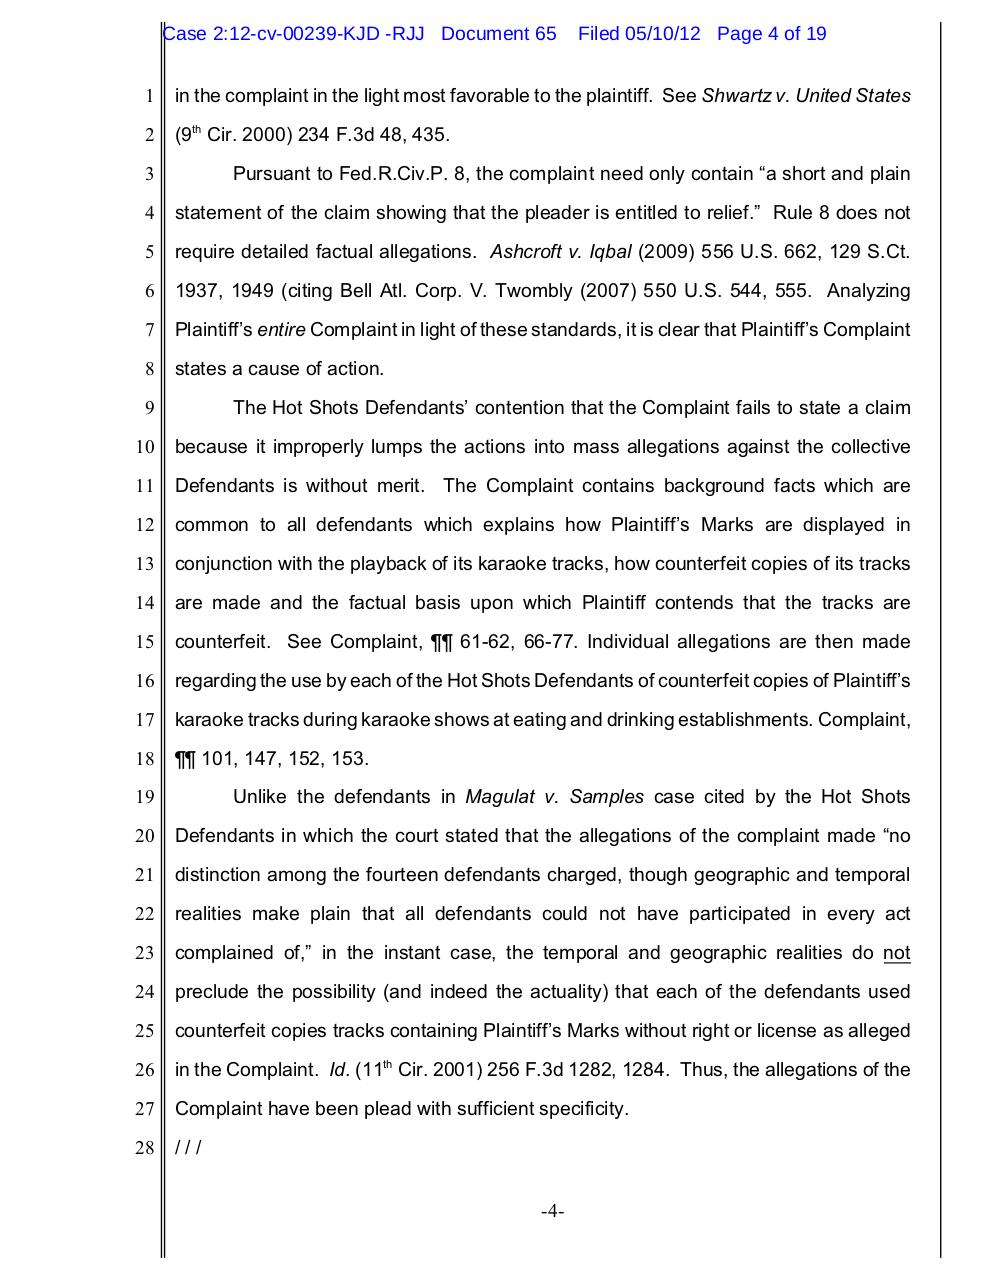 65 - Slep-Tone's response to Hot Shots' Motion to Dismiss.pdf - page 4/19